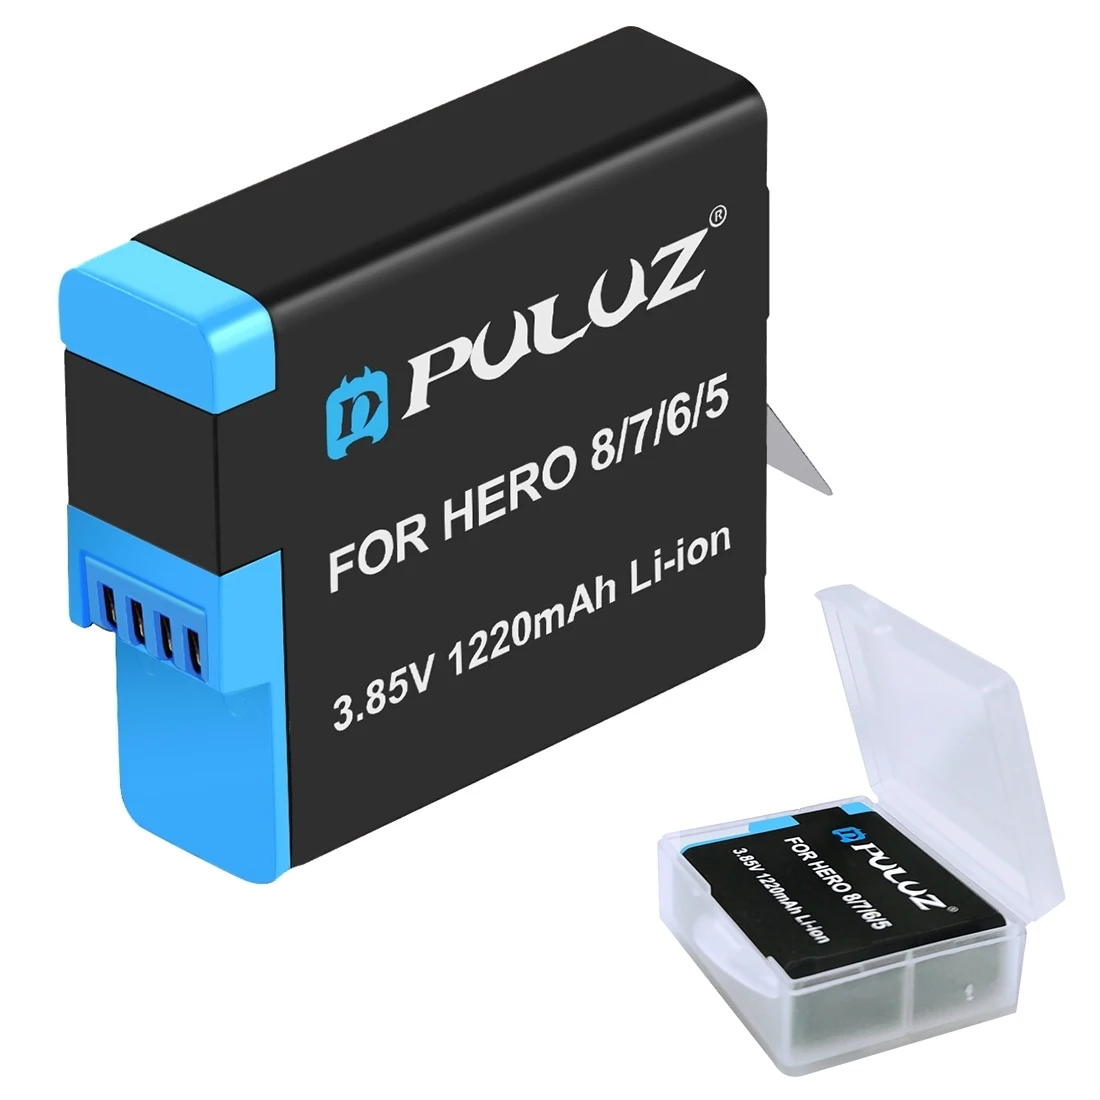 PULUZ Rechargeable lithium-ion Battery For GoPro HERO8/7/6/5/4 Action Camera Batteries Accessories Available for sale in Russia